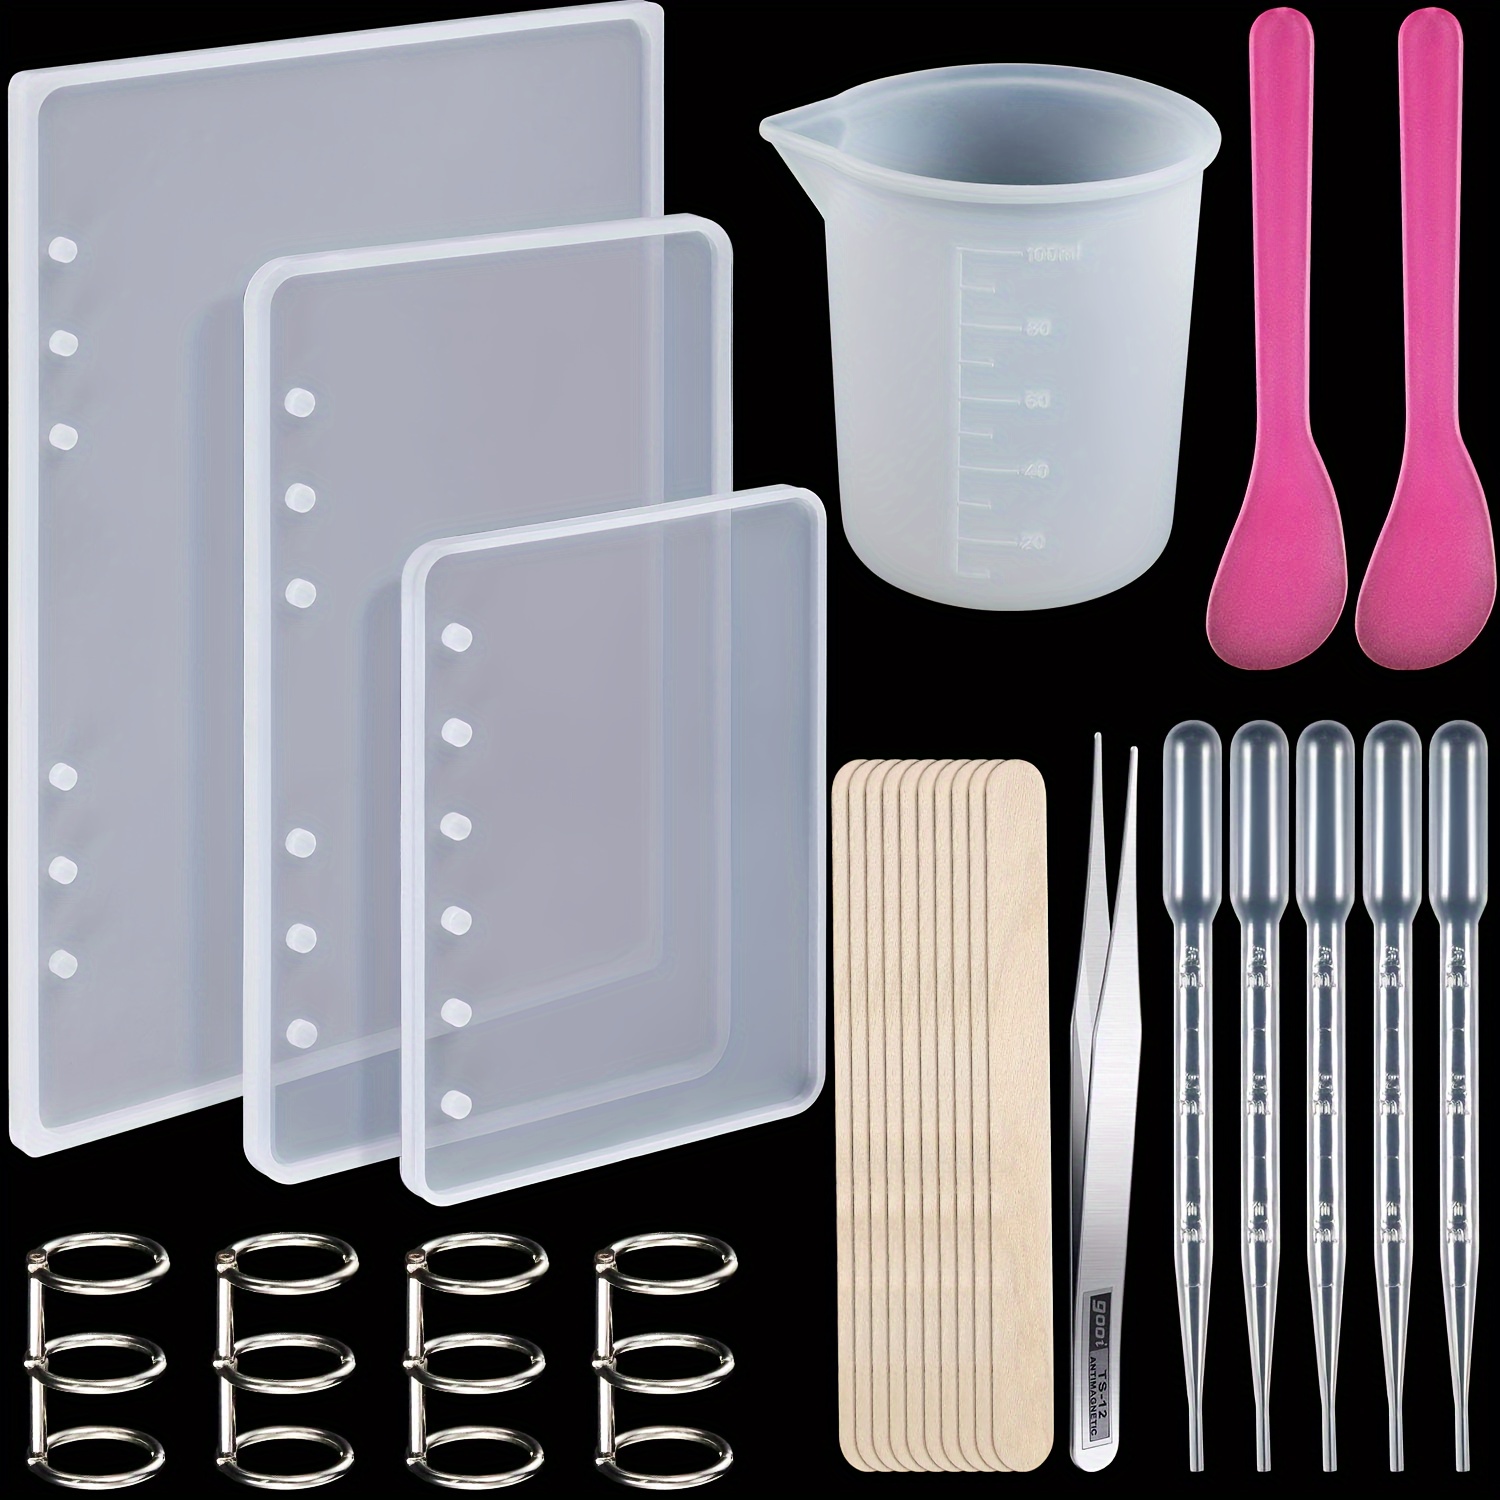 

Diy Notebook Making Kit: 26-piece Silicone Mold Set For A5, A6, A7 Sizes - Includes Epoxy Resin Molds, Book Rings, Tools & Wooden Sticks For Personalized Notebook Covers